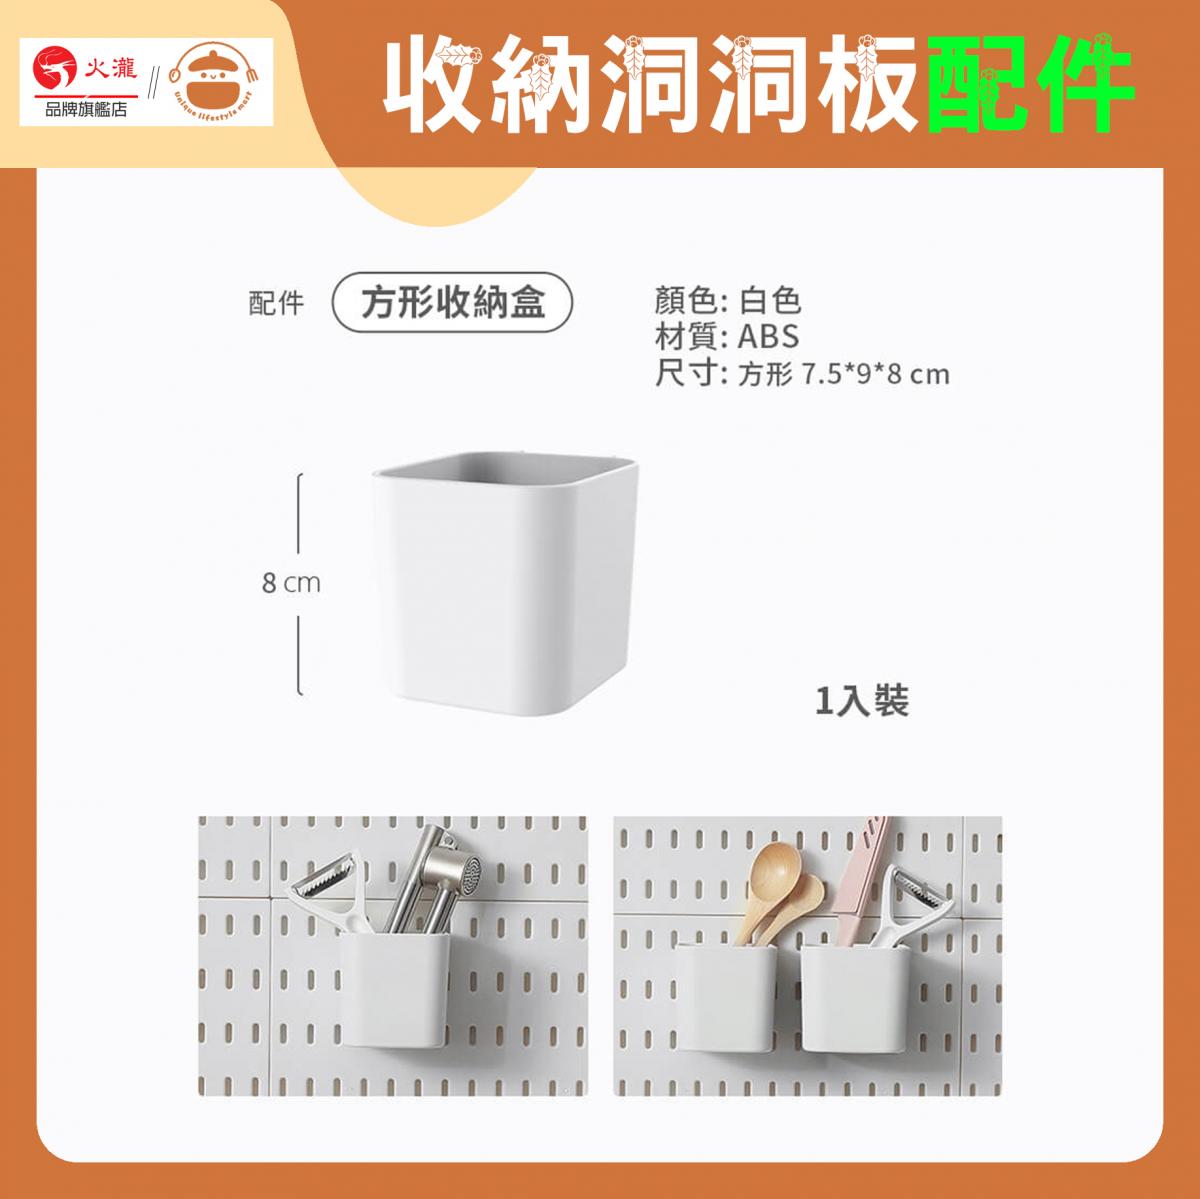 Nail-free Storage Perforated Board Accessories [Square Storage Box] - Bathroom Kitchen Wall Decoration